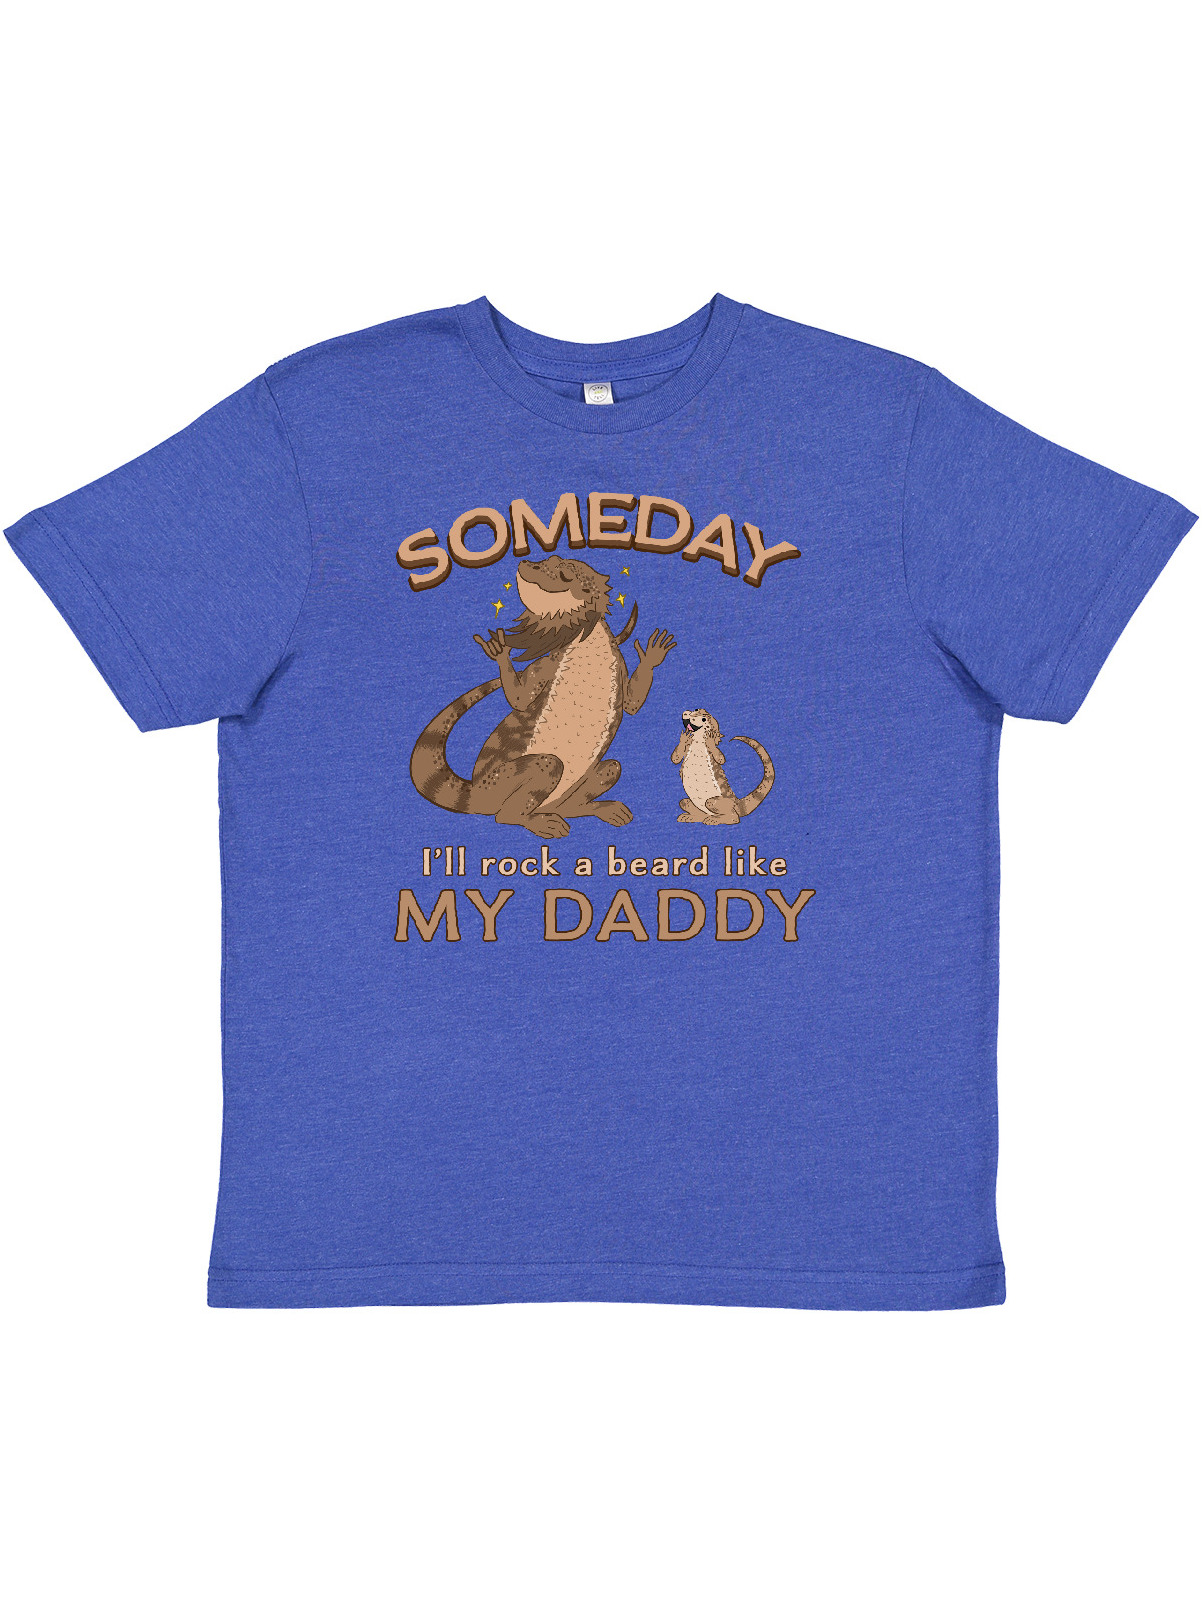 Inktastic Someday I'll Rock A Beard Like My Daddy-Bearded Dragons Youth T-Shirt - image 1 of 4